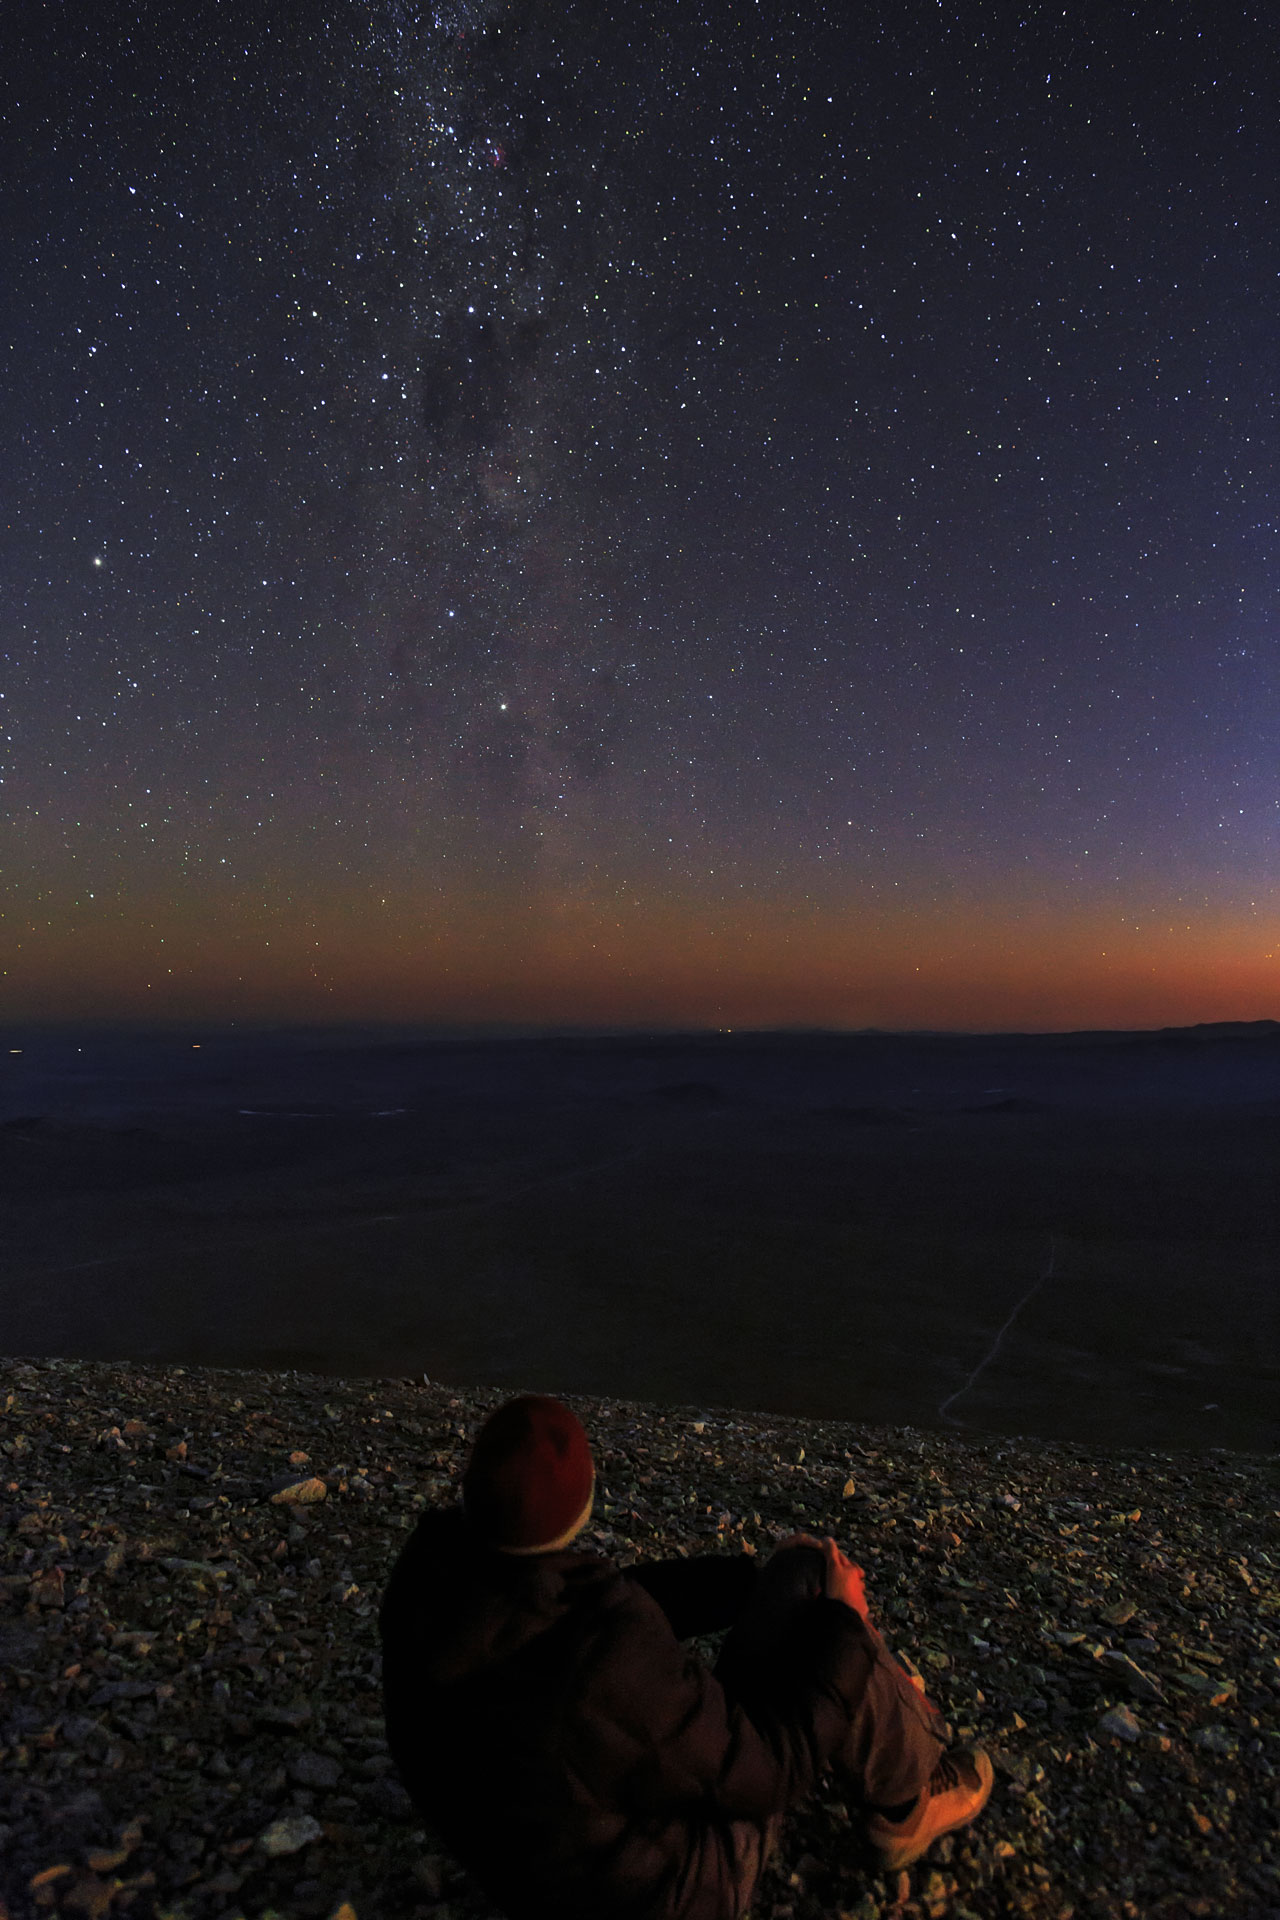 Gazing at the Chilean night sky